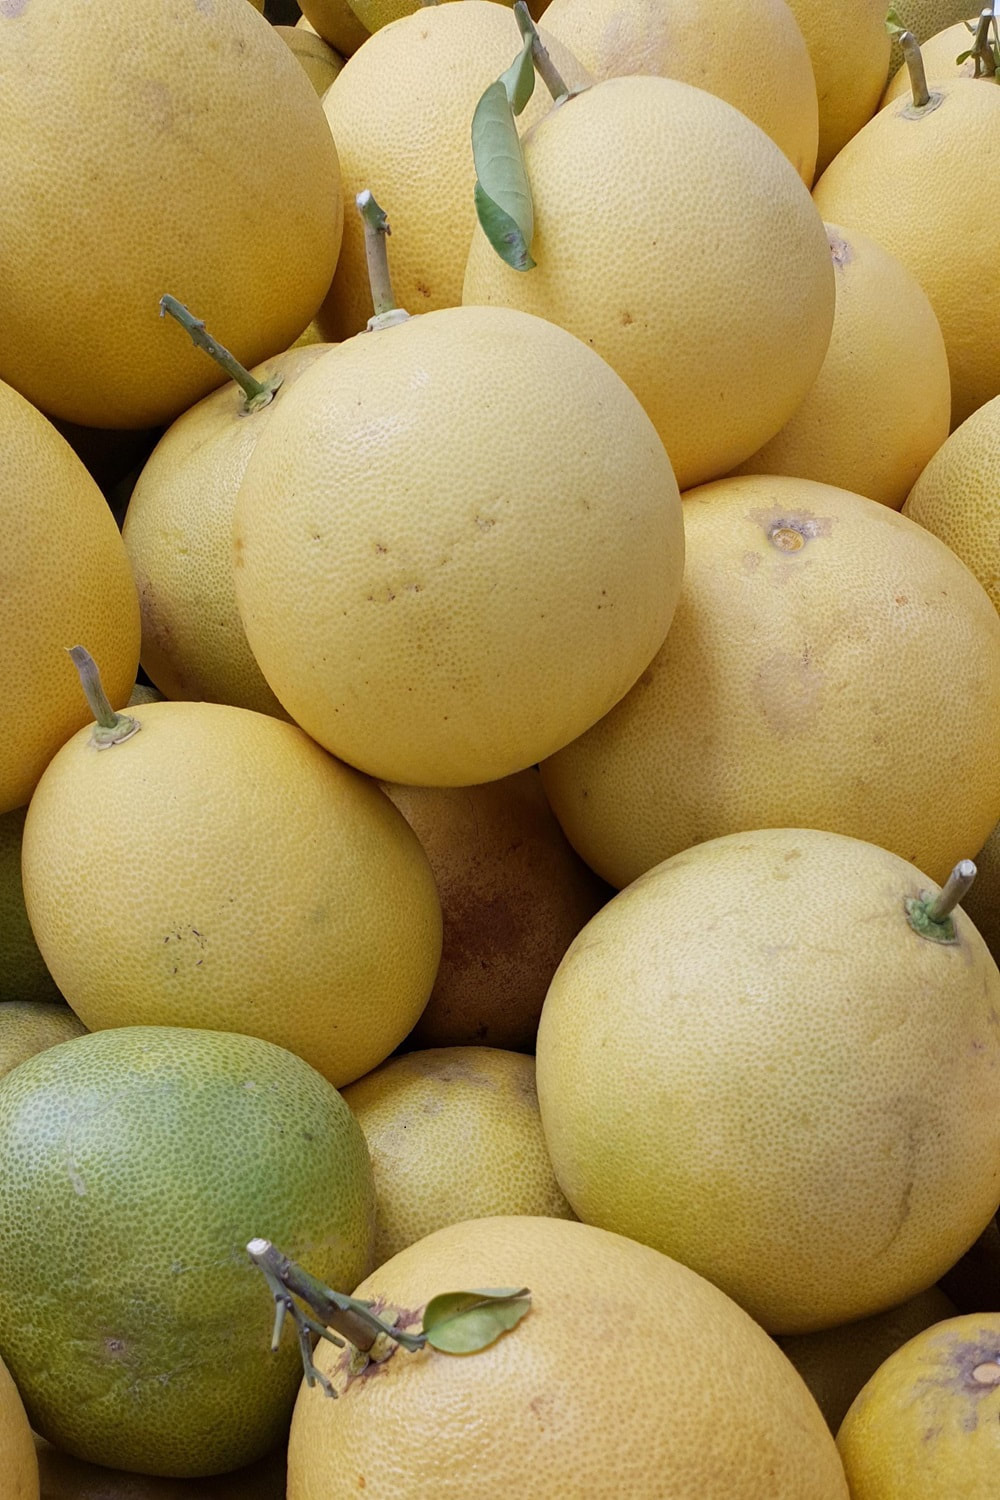 Yellow pomelo, photo by M. Majed from Pixabay.